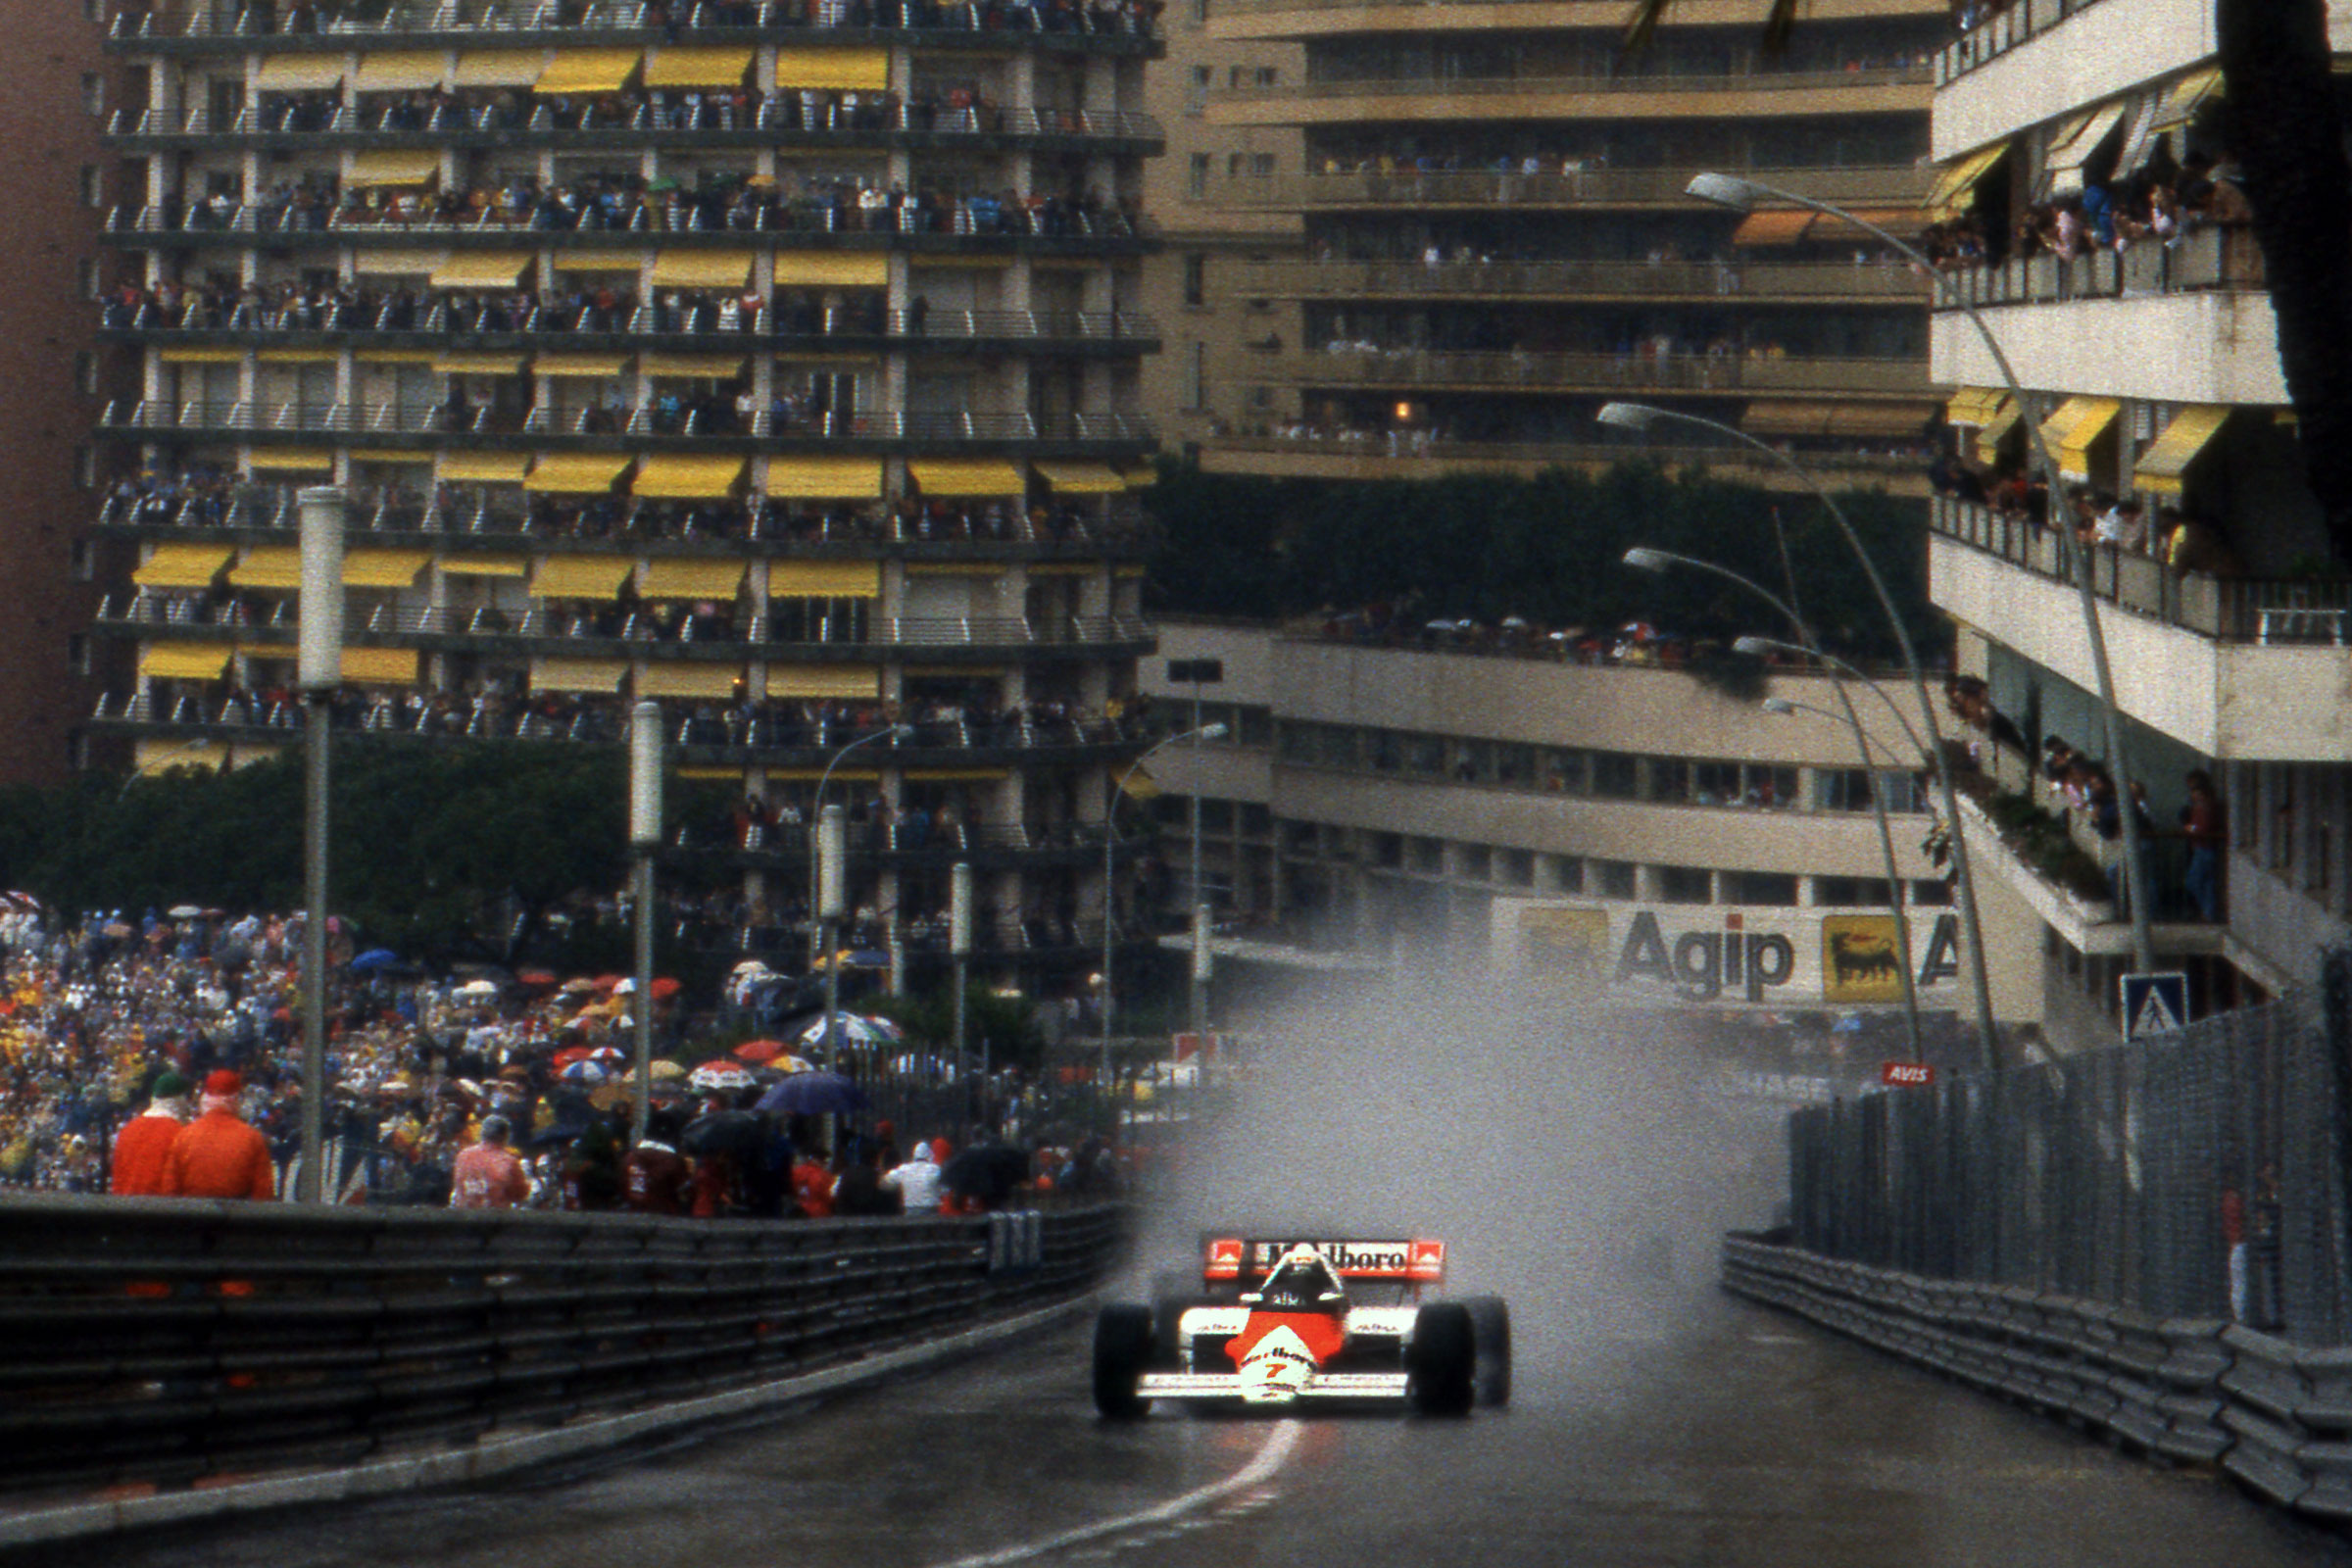 Alain Prost leads the opening lap of the Grand Prix of Monaco on June 3, 1984